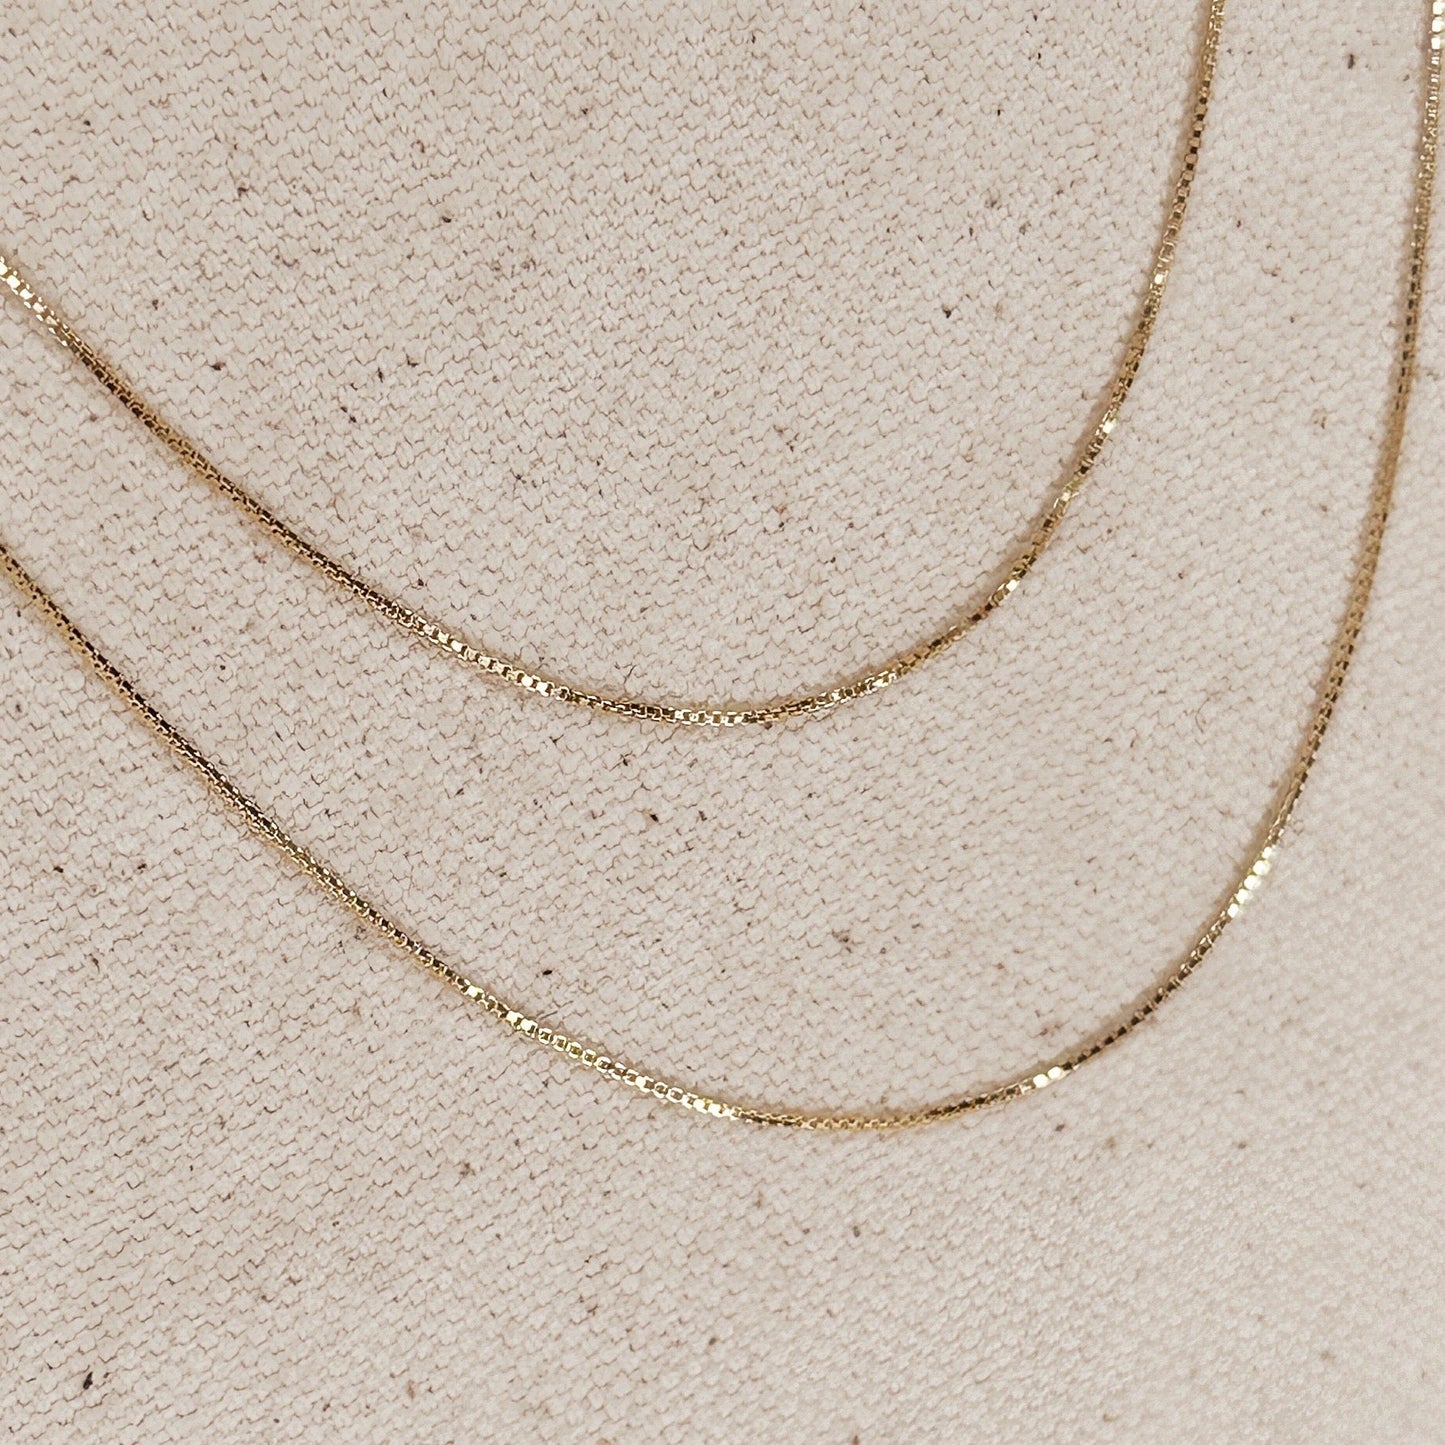 Dainty Cross Gold Filled Dainty Chain Necklace